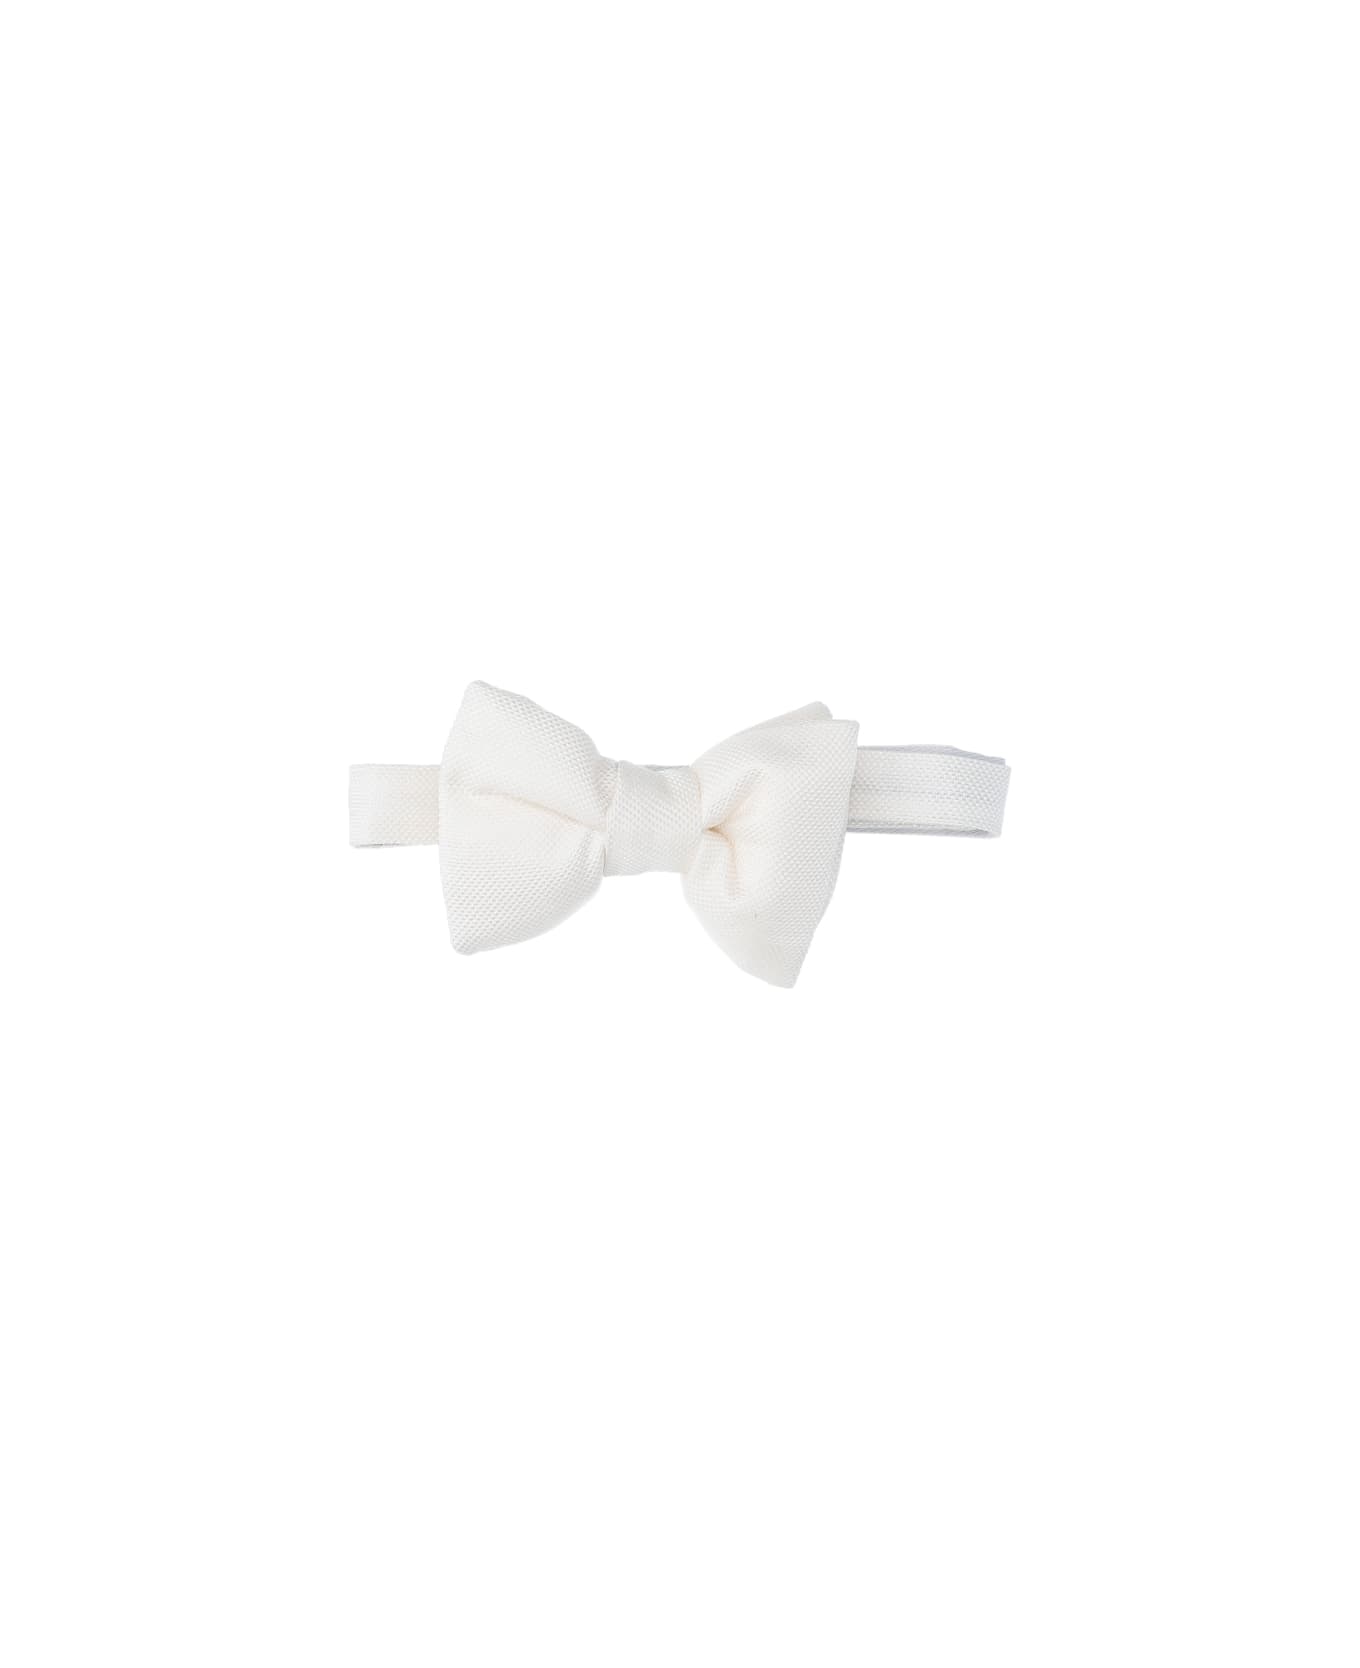 Tom Ford Tie - White ネクタイ